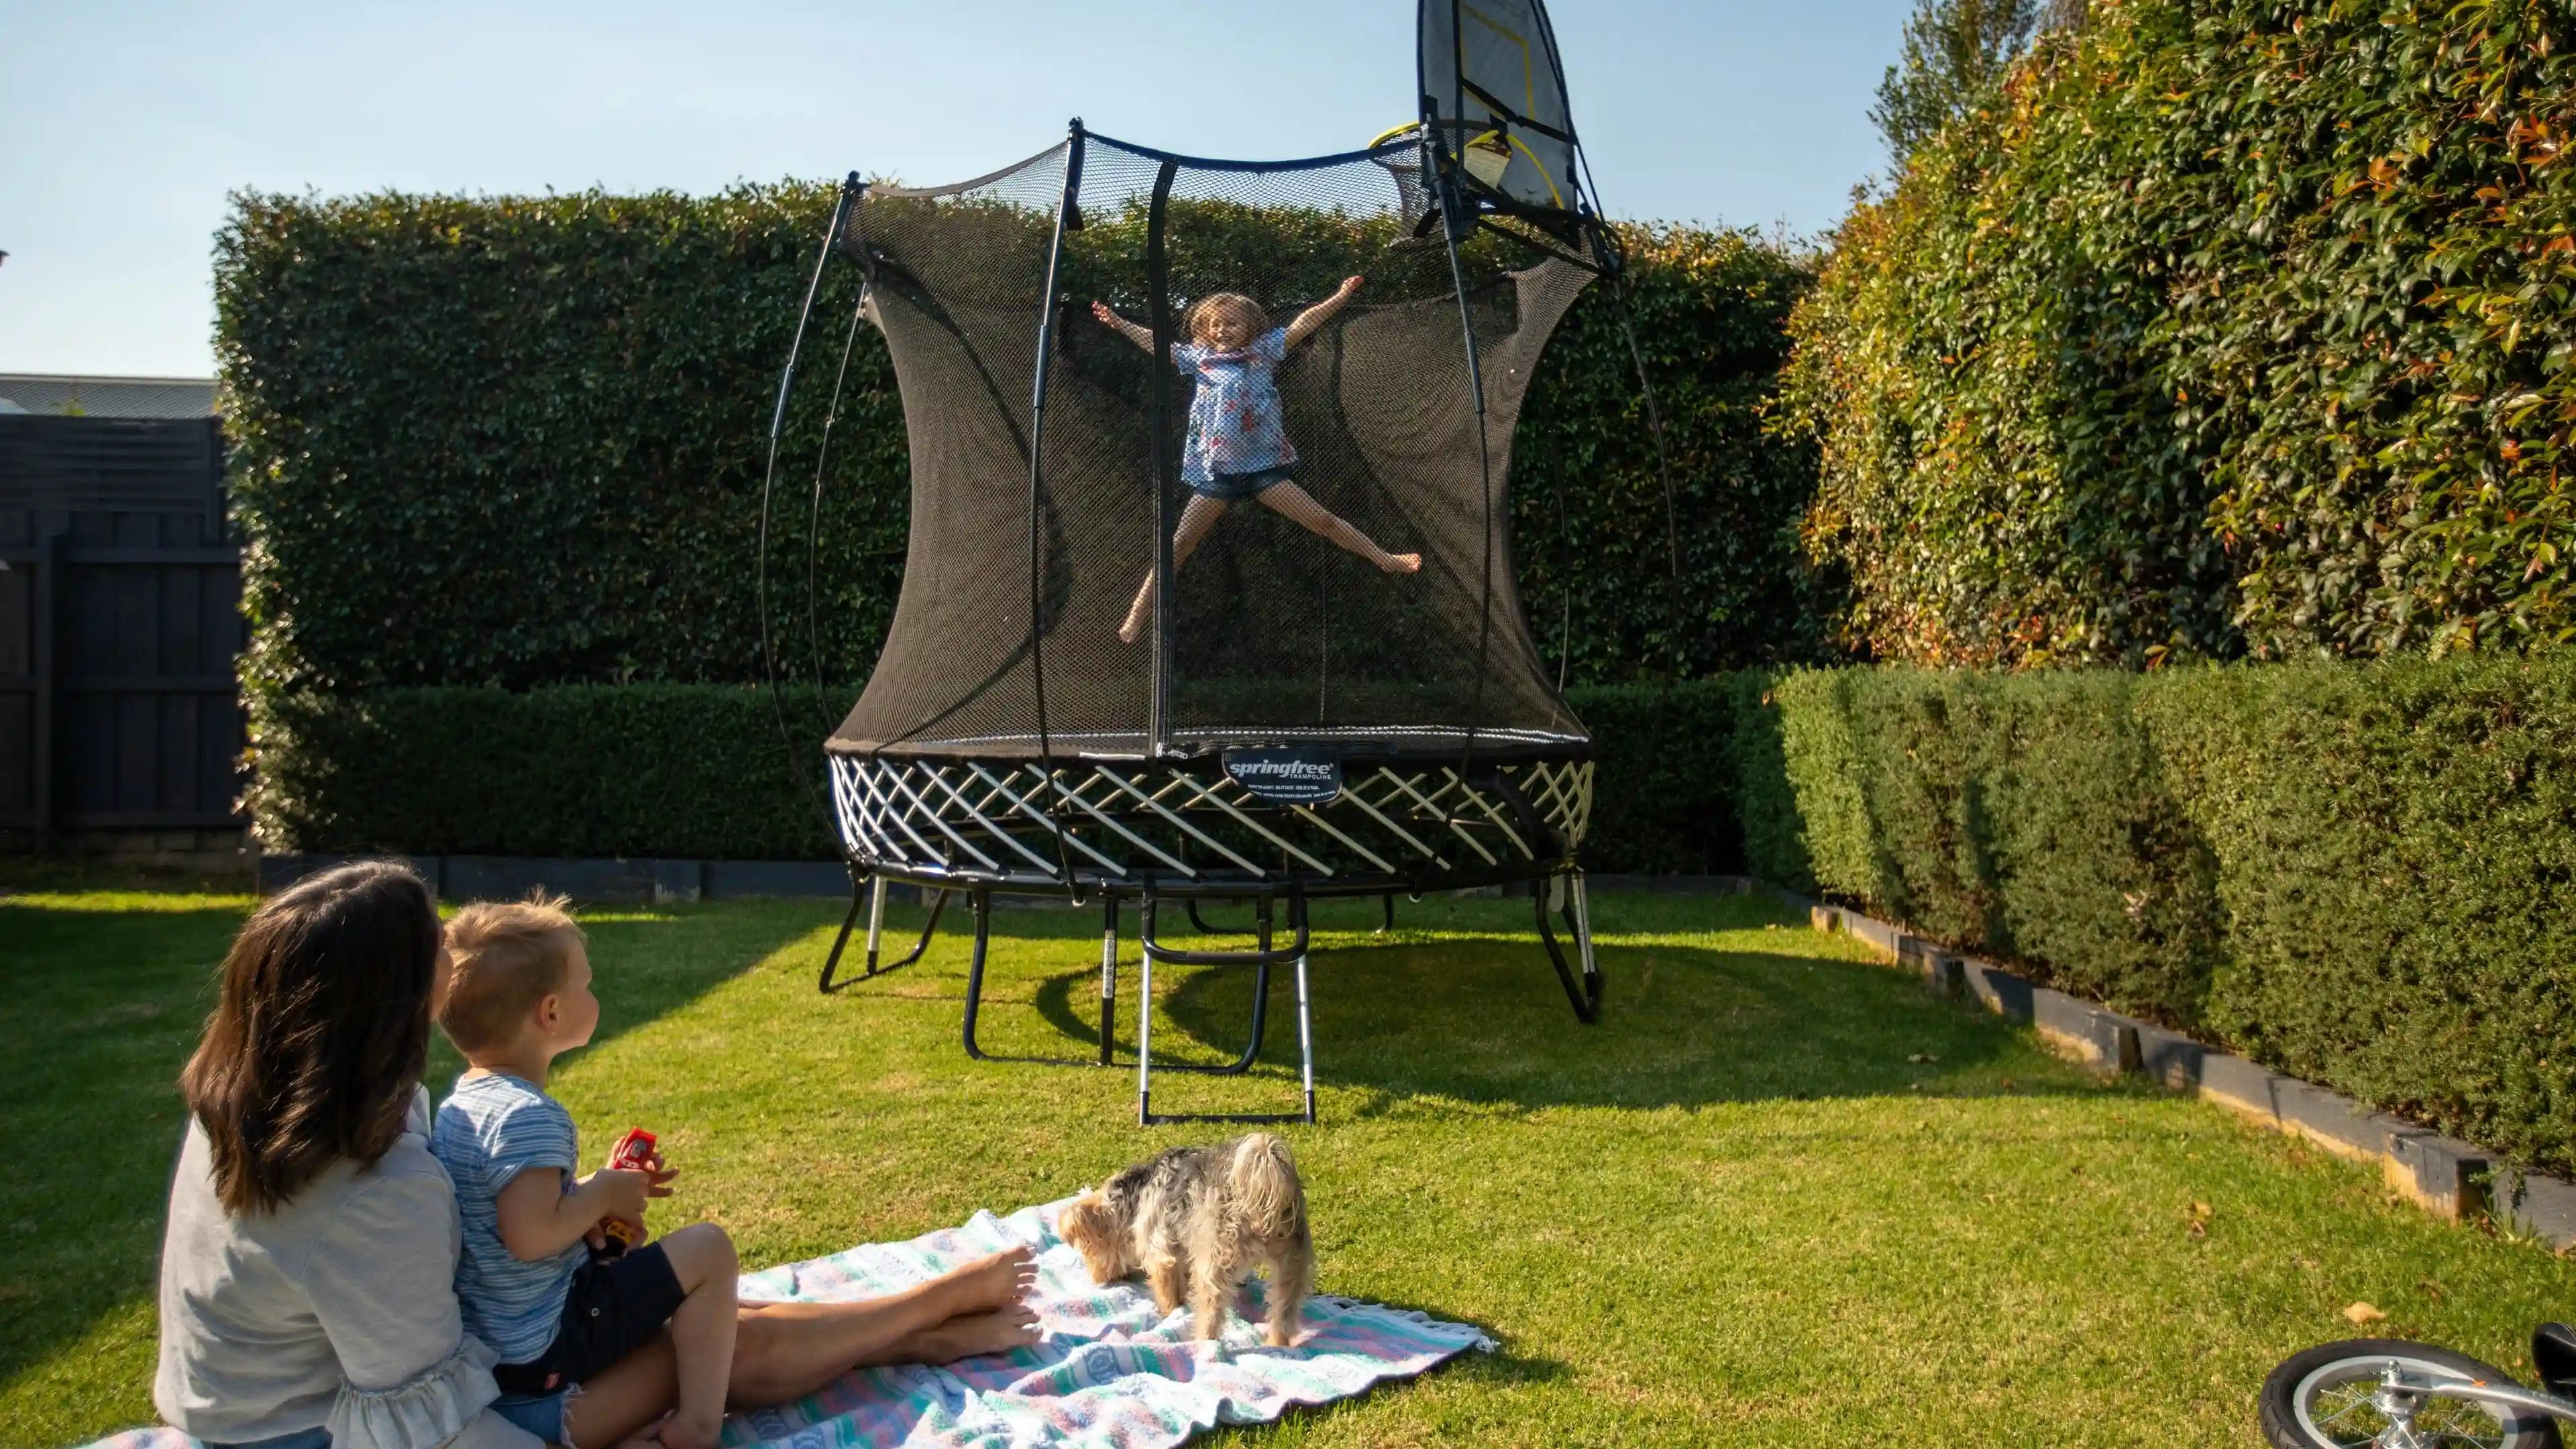 girl jumping so high on an outdoor trampoline while a lady and a kid are watching her